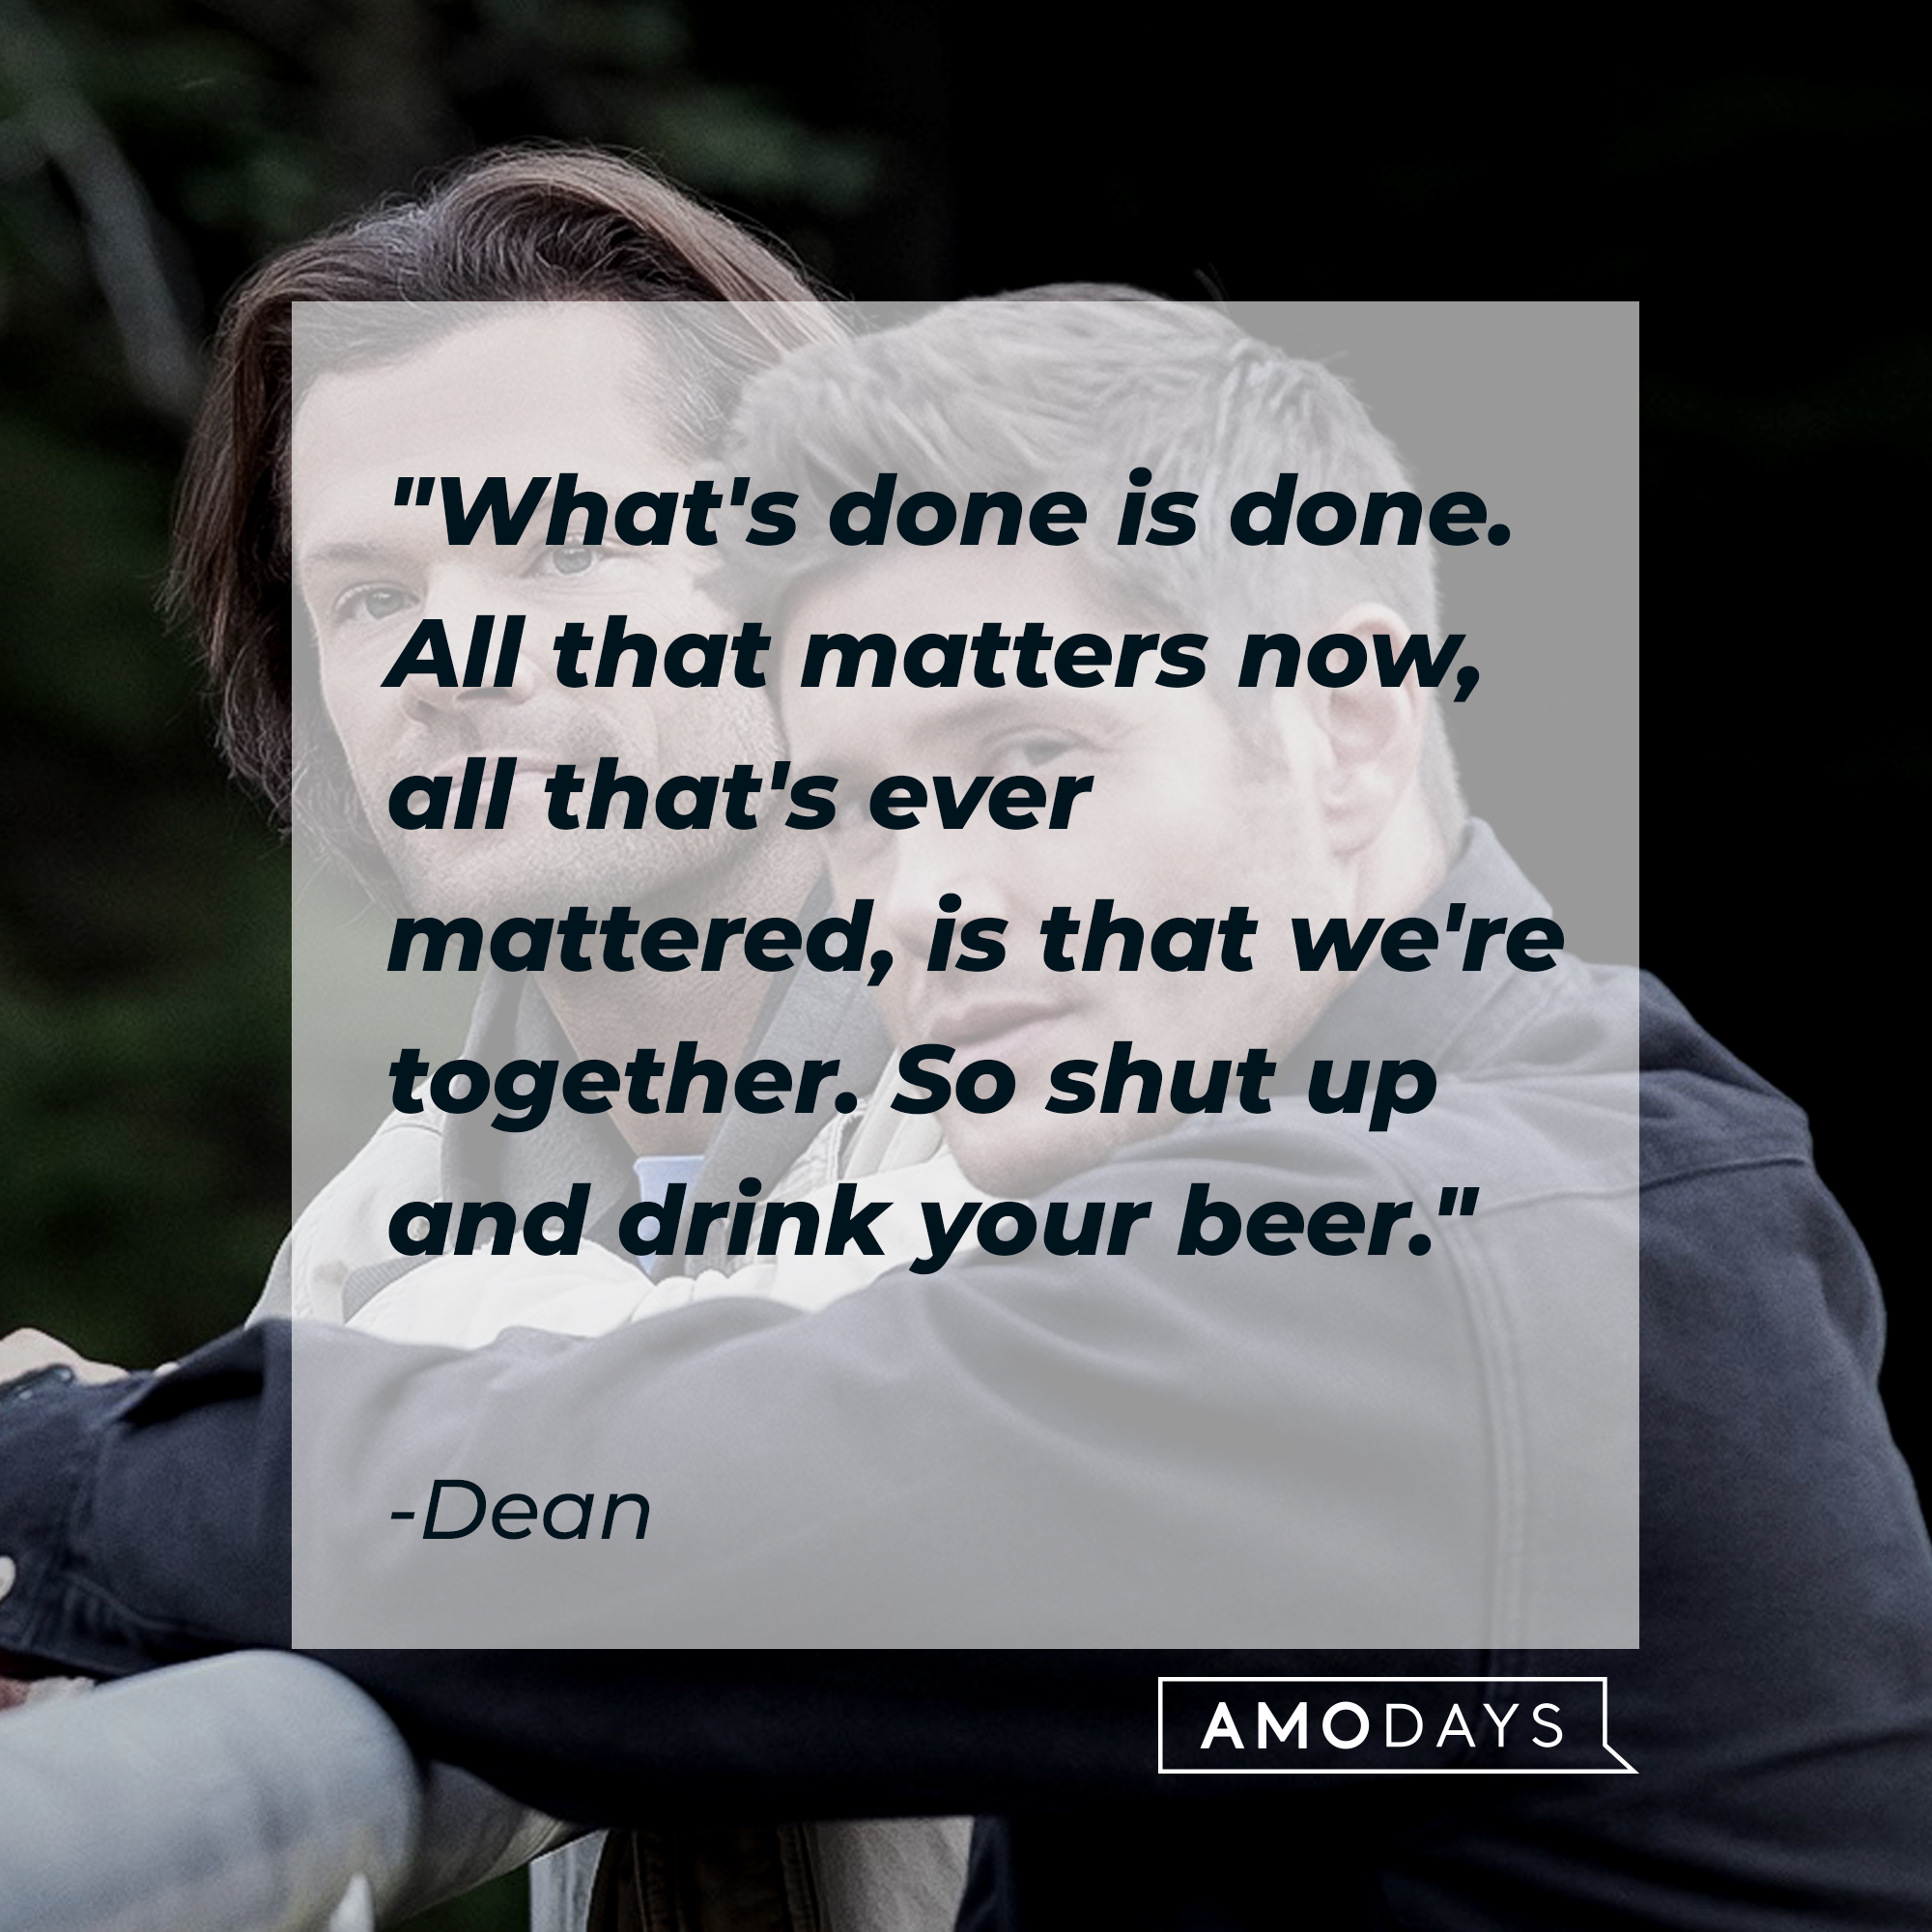 A photo of Sam and Dean Winchester with the quote, "What's done is done. All that matters now, all that's ever mattered, is that we're together. So shut up and drink your beer." | Source: Facebook/Supernatural